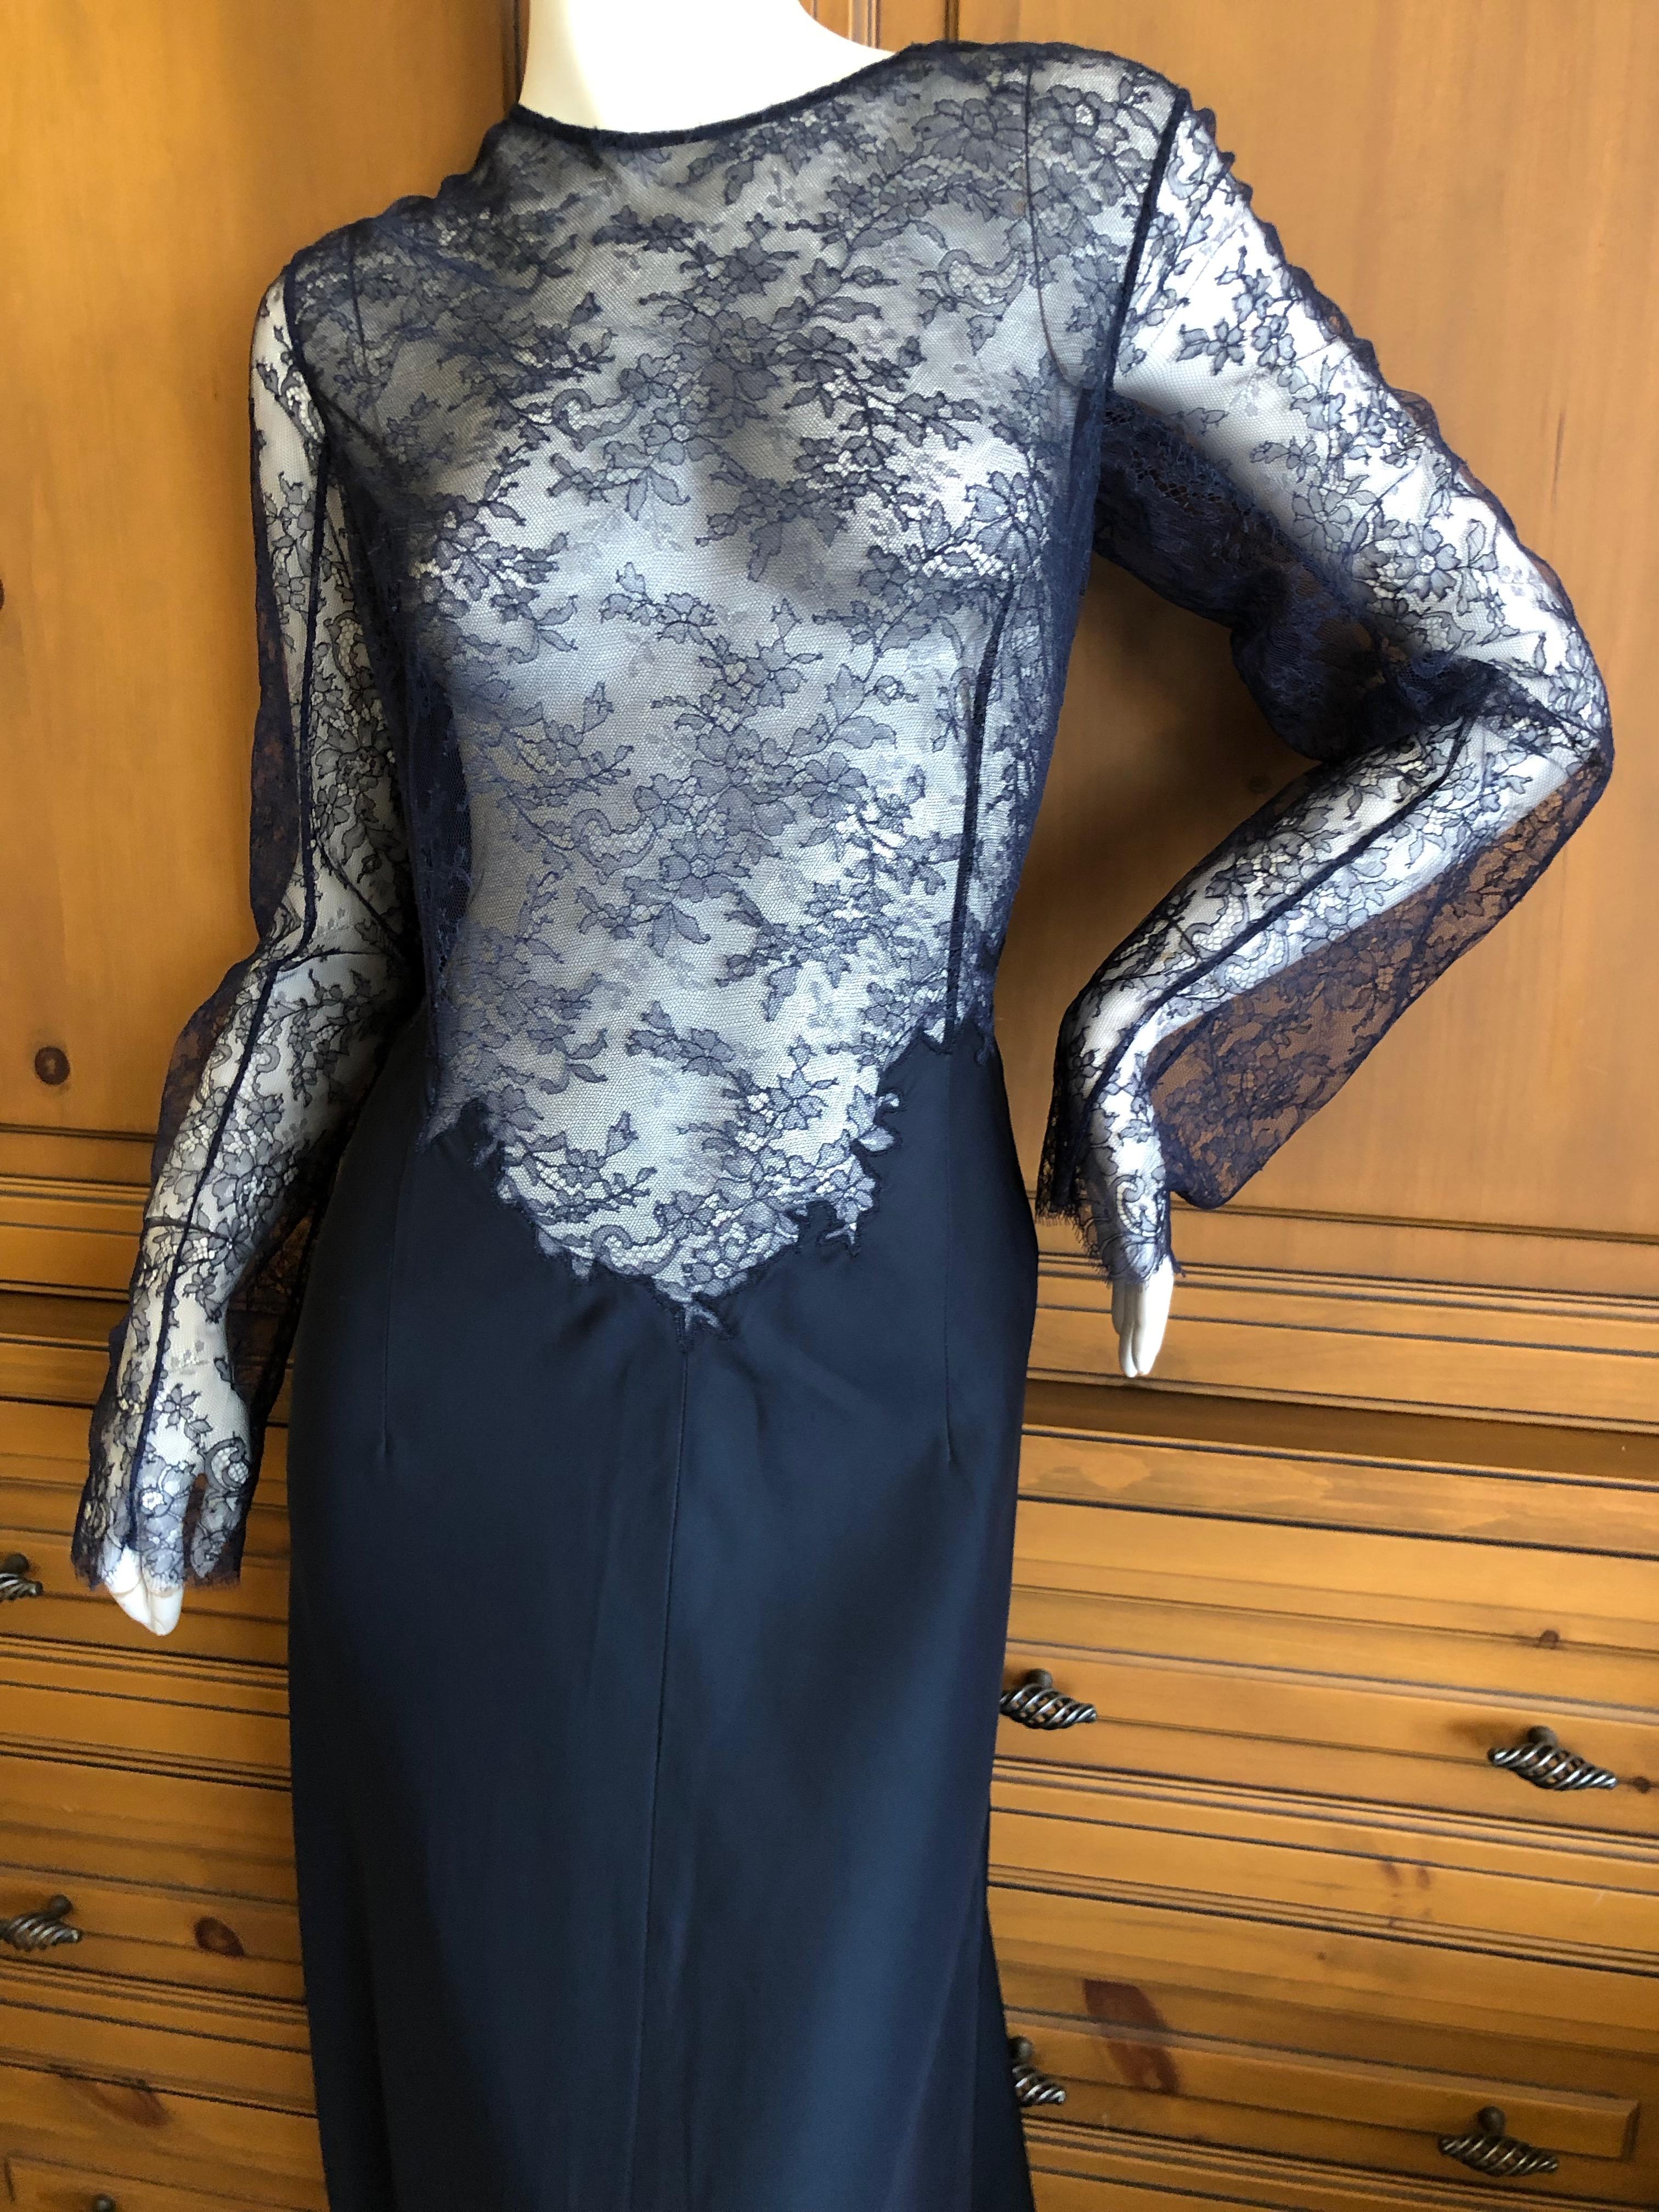 Women's Nina Ricci by Peter Copping Navy Blue Sheer Lace Evening Dress with Train